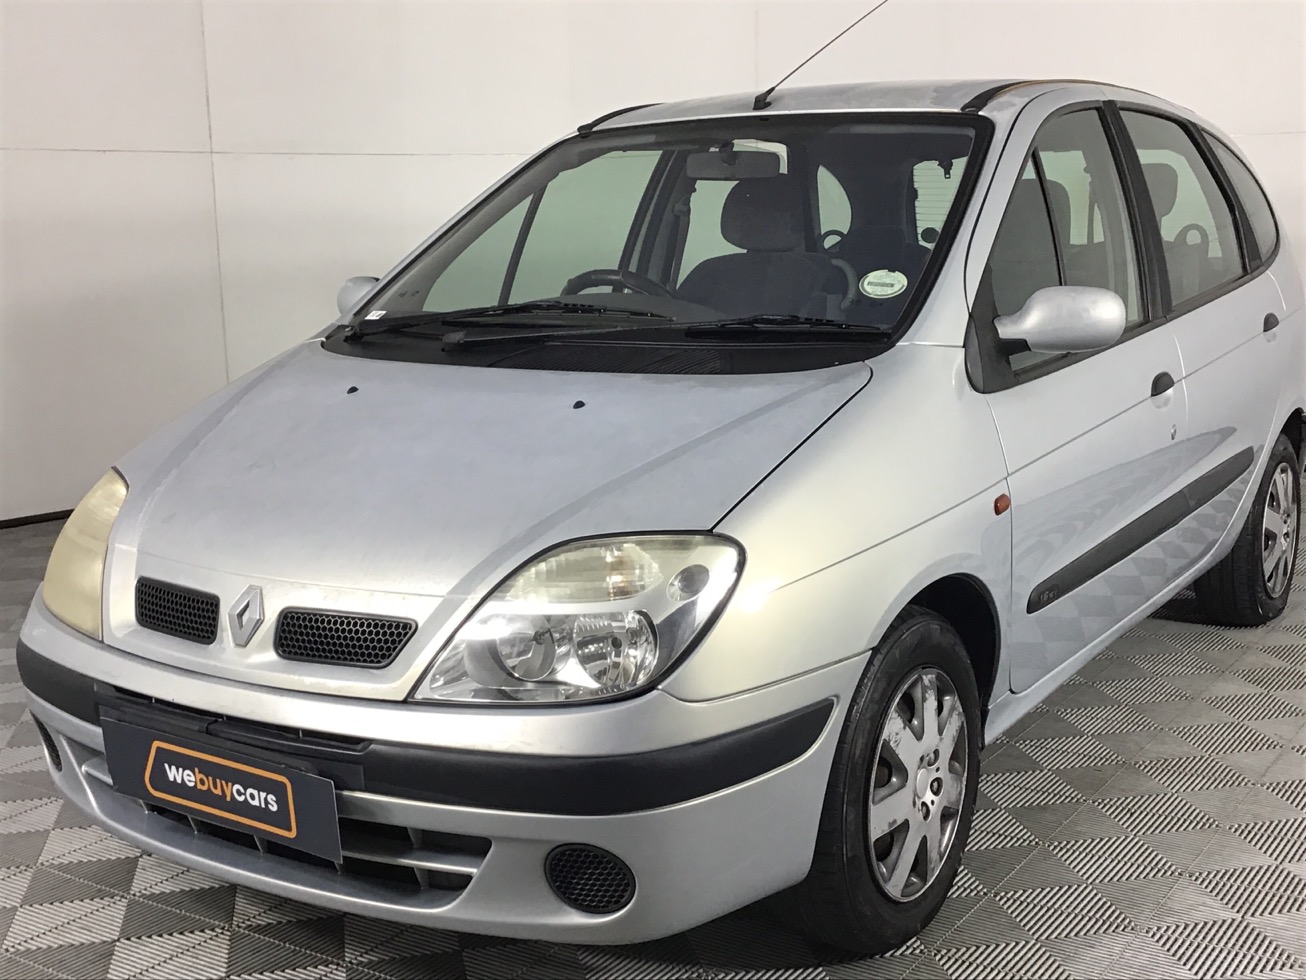 Used 2001 Renault Scenic 1.6 Expression for sale WeBuyCars